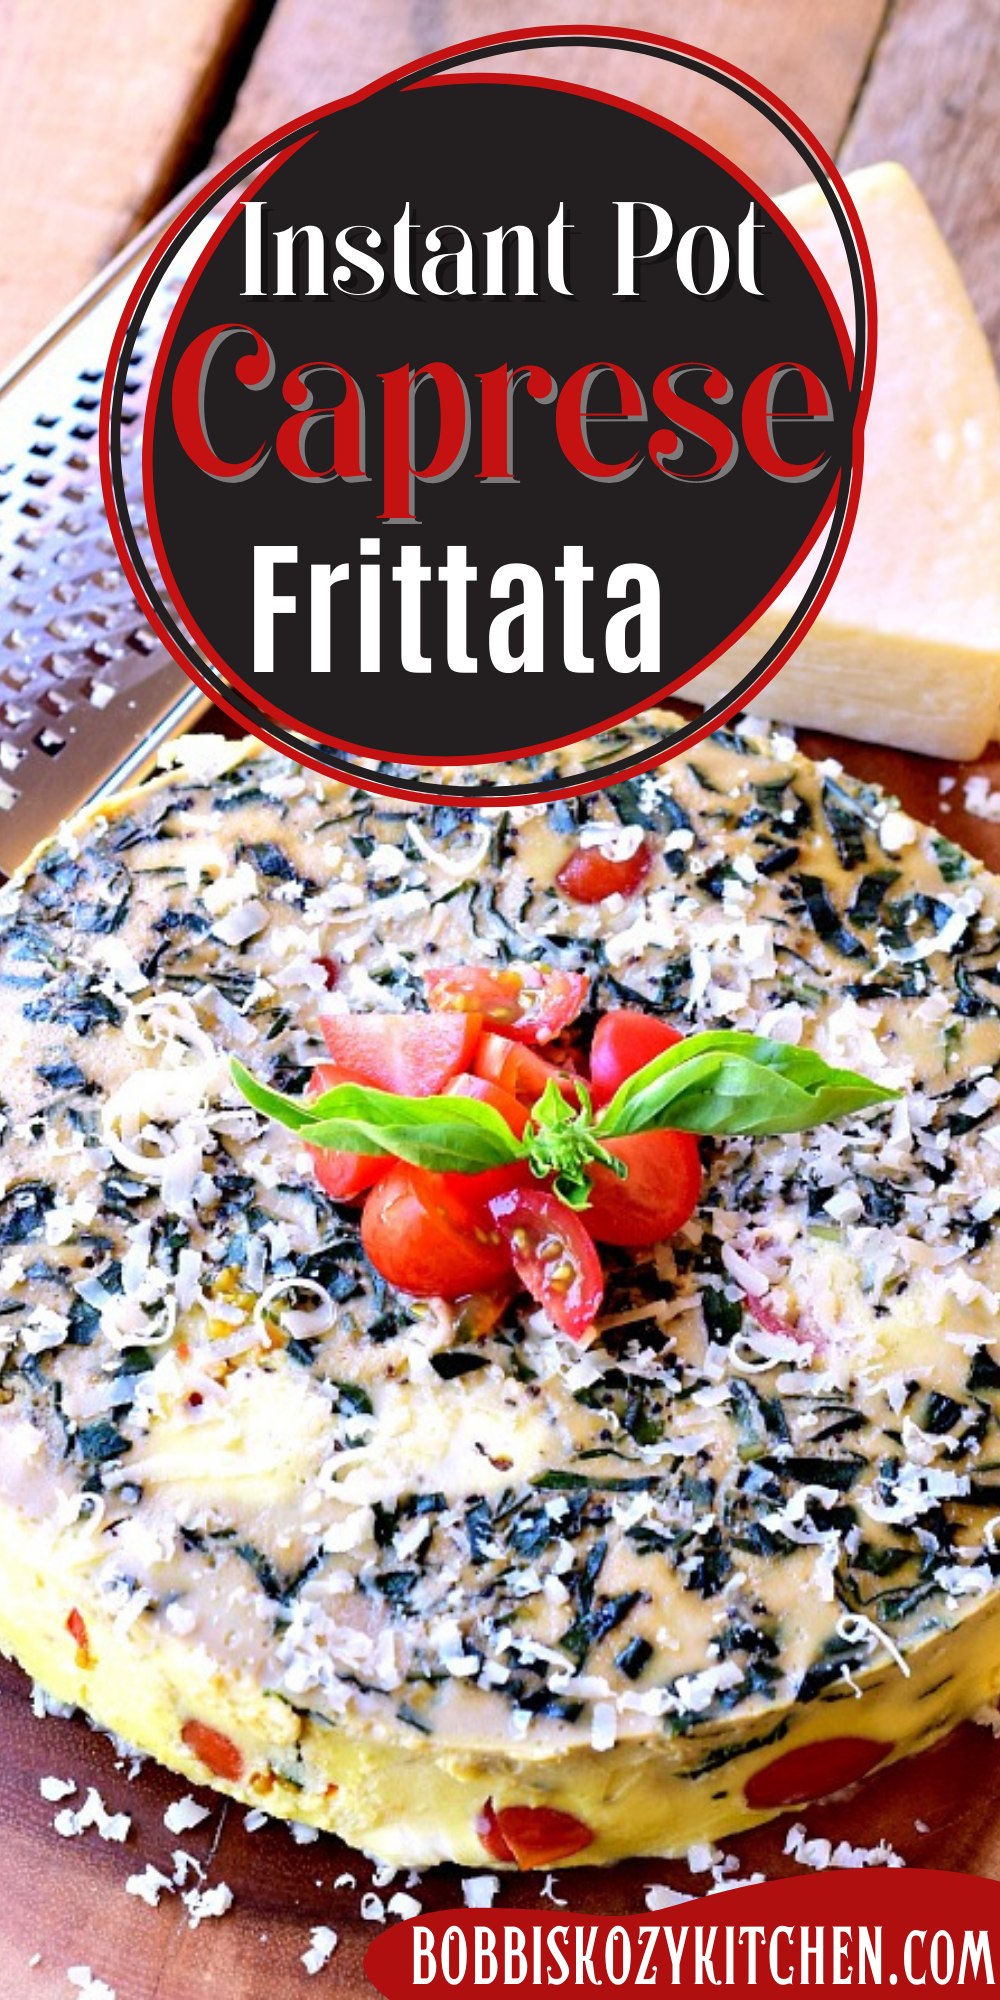 Pinterest graphic with image of an instant pot caprese frittata on it.